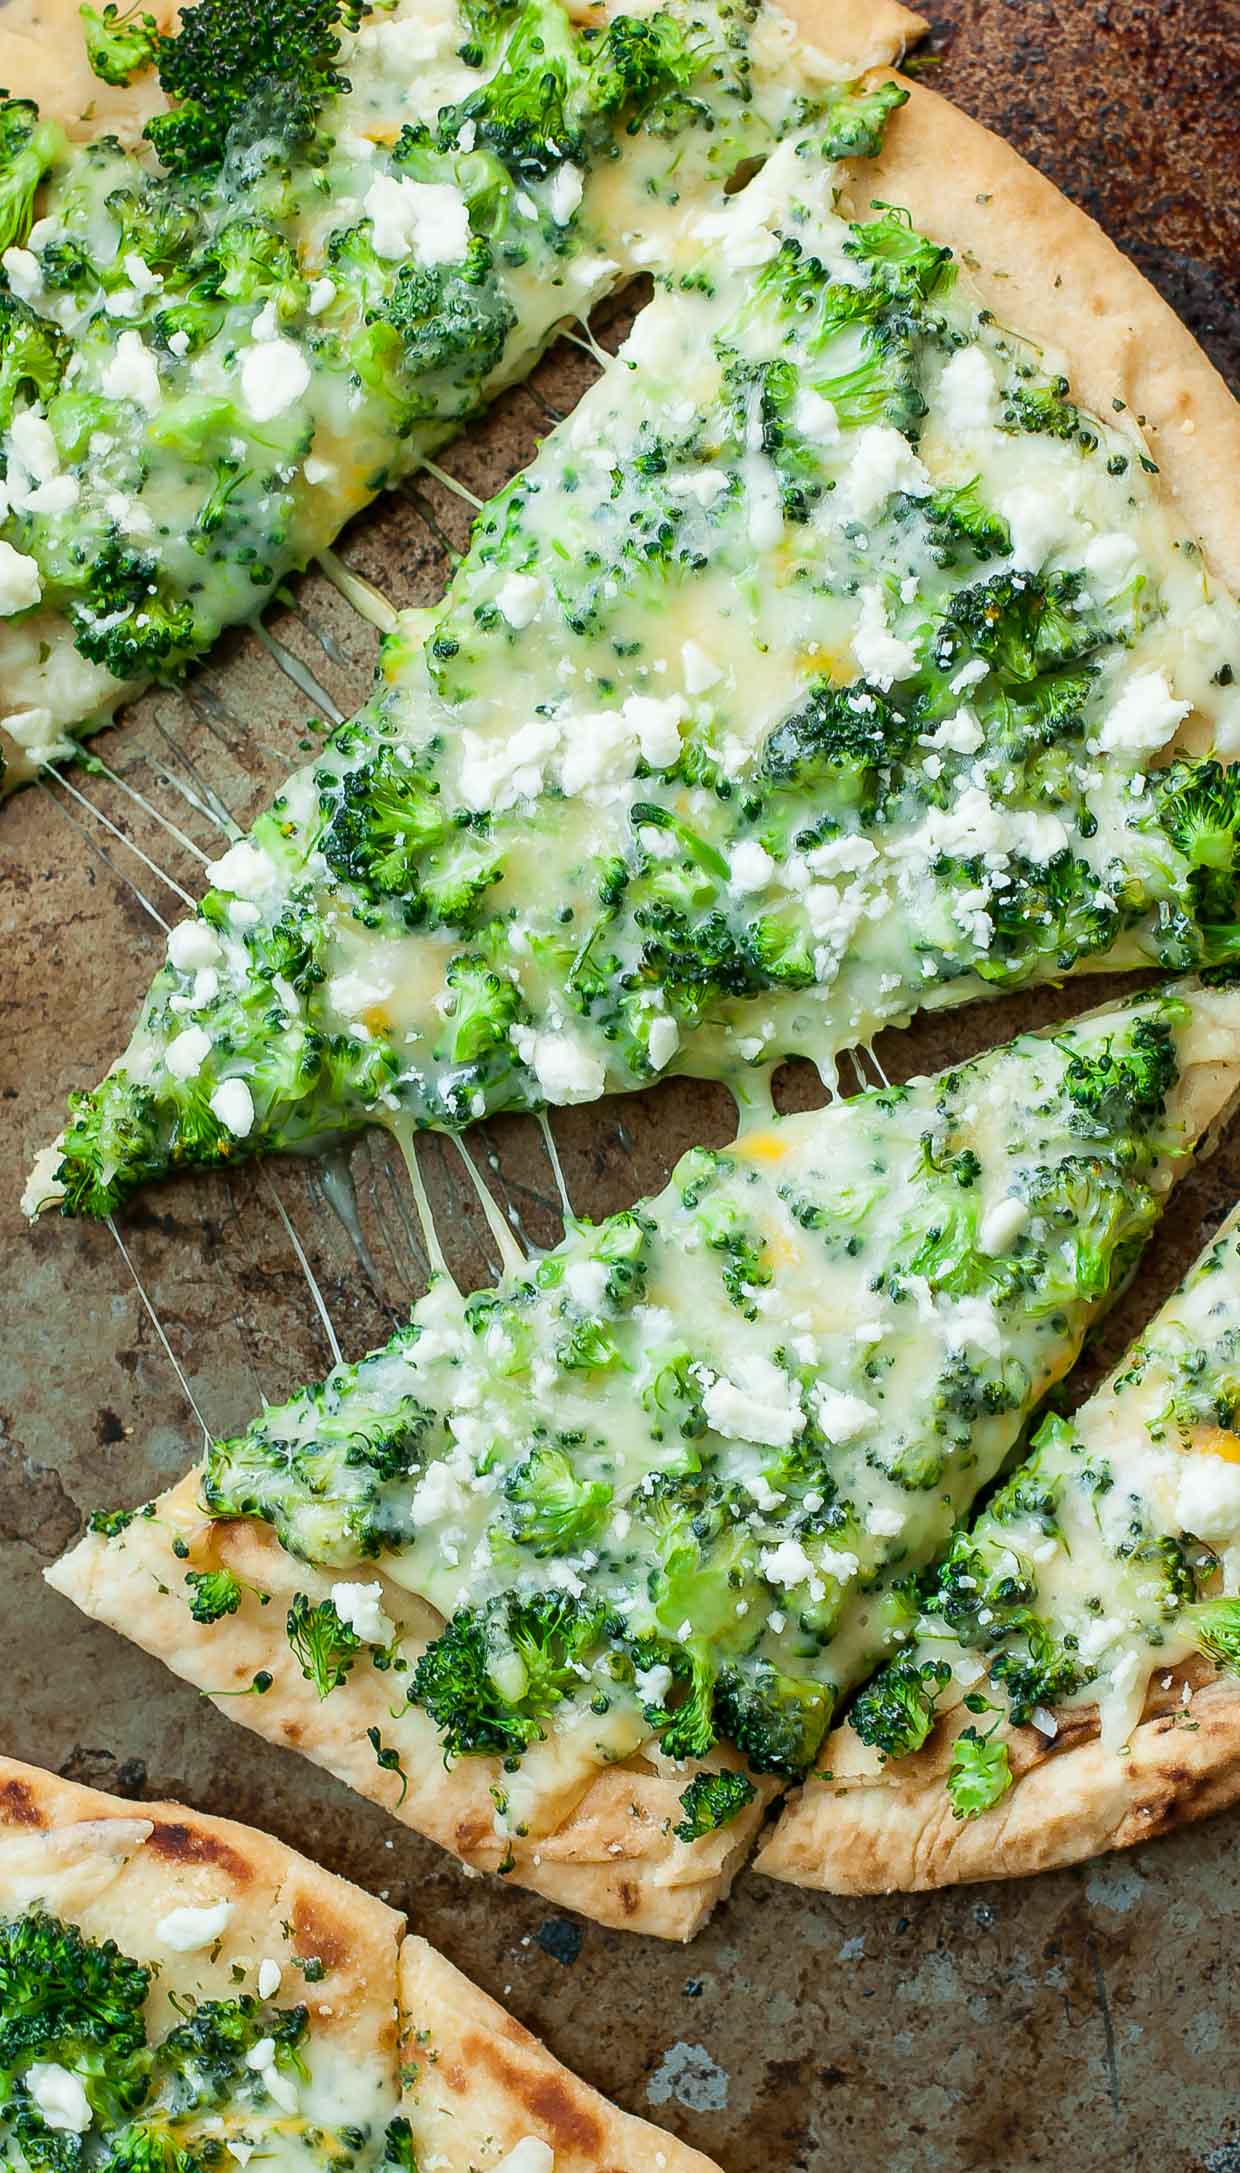 Put on your pizza pants and get your pizza fix with these 8 Easy Pizza Recipes! Gluten-Free, Vegetarian, and Low-Carb options available too! Hellooooo pizza night! :: Broccoli Cheddar Four Cheese Pizza Flatbreads